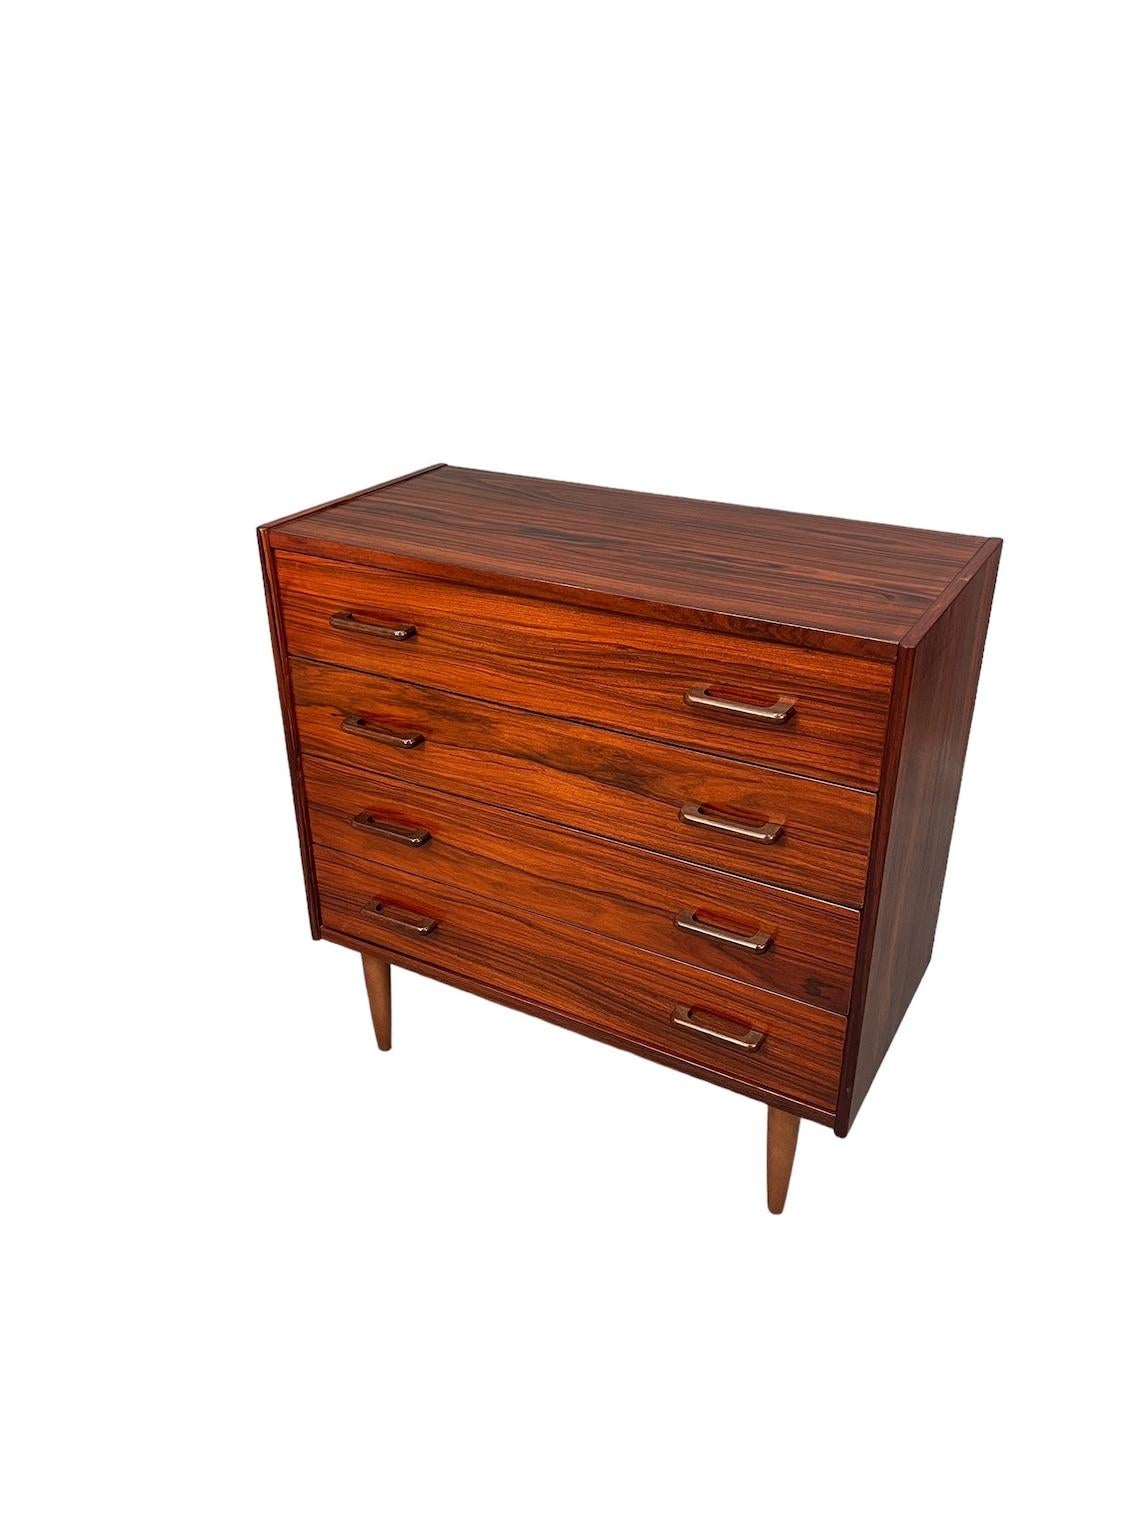 Mid-Century Rosewood dresser with 4 drawers 

Dimensions:
L:33 D:16 H:33 inches

Condition:
very good for age and use 